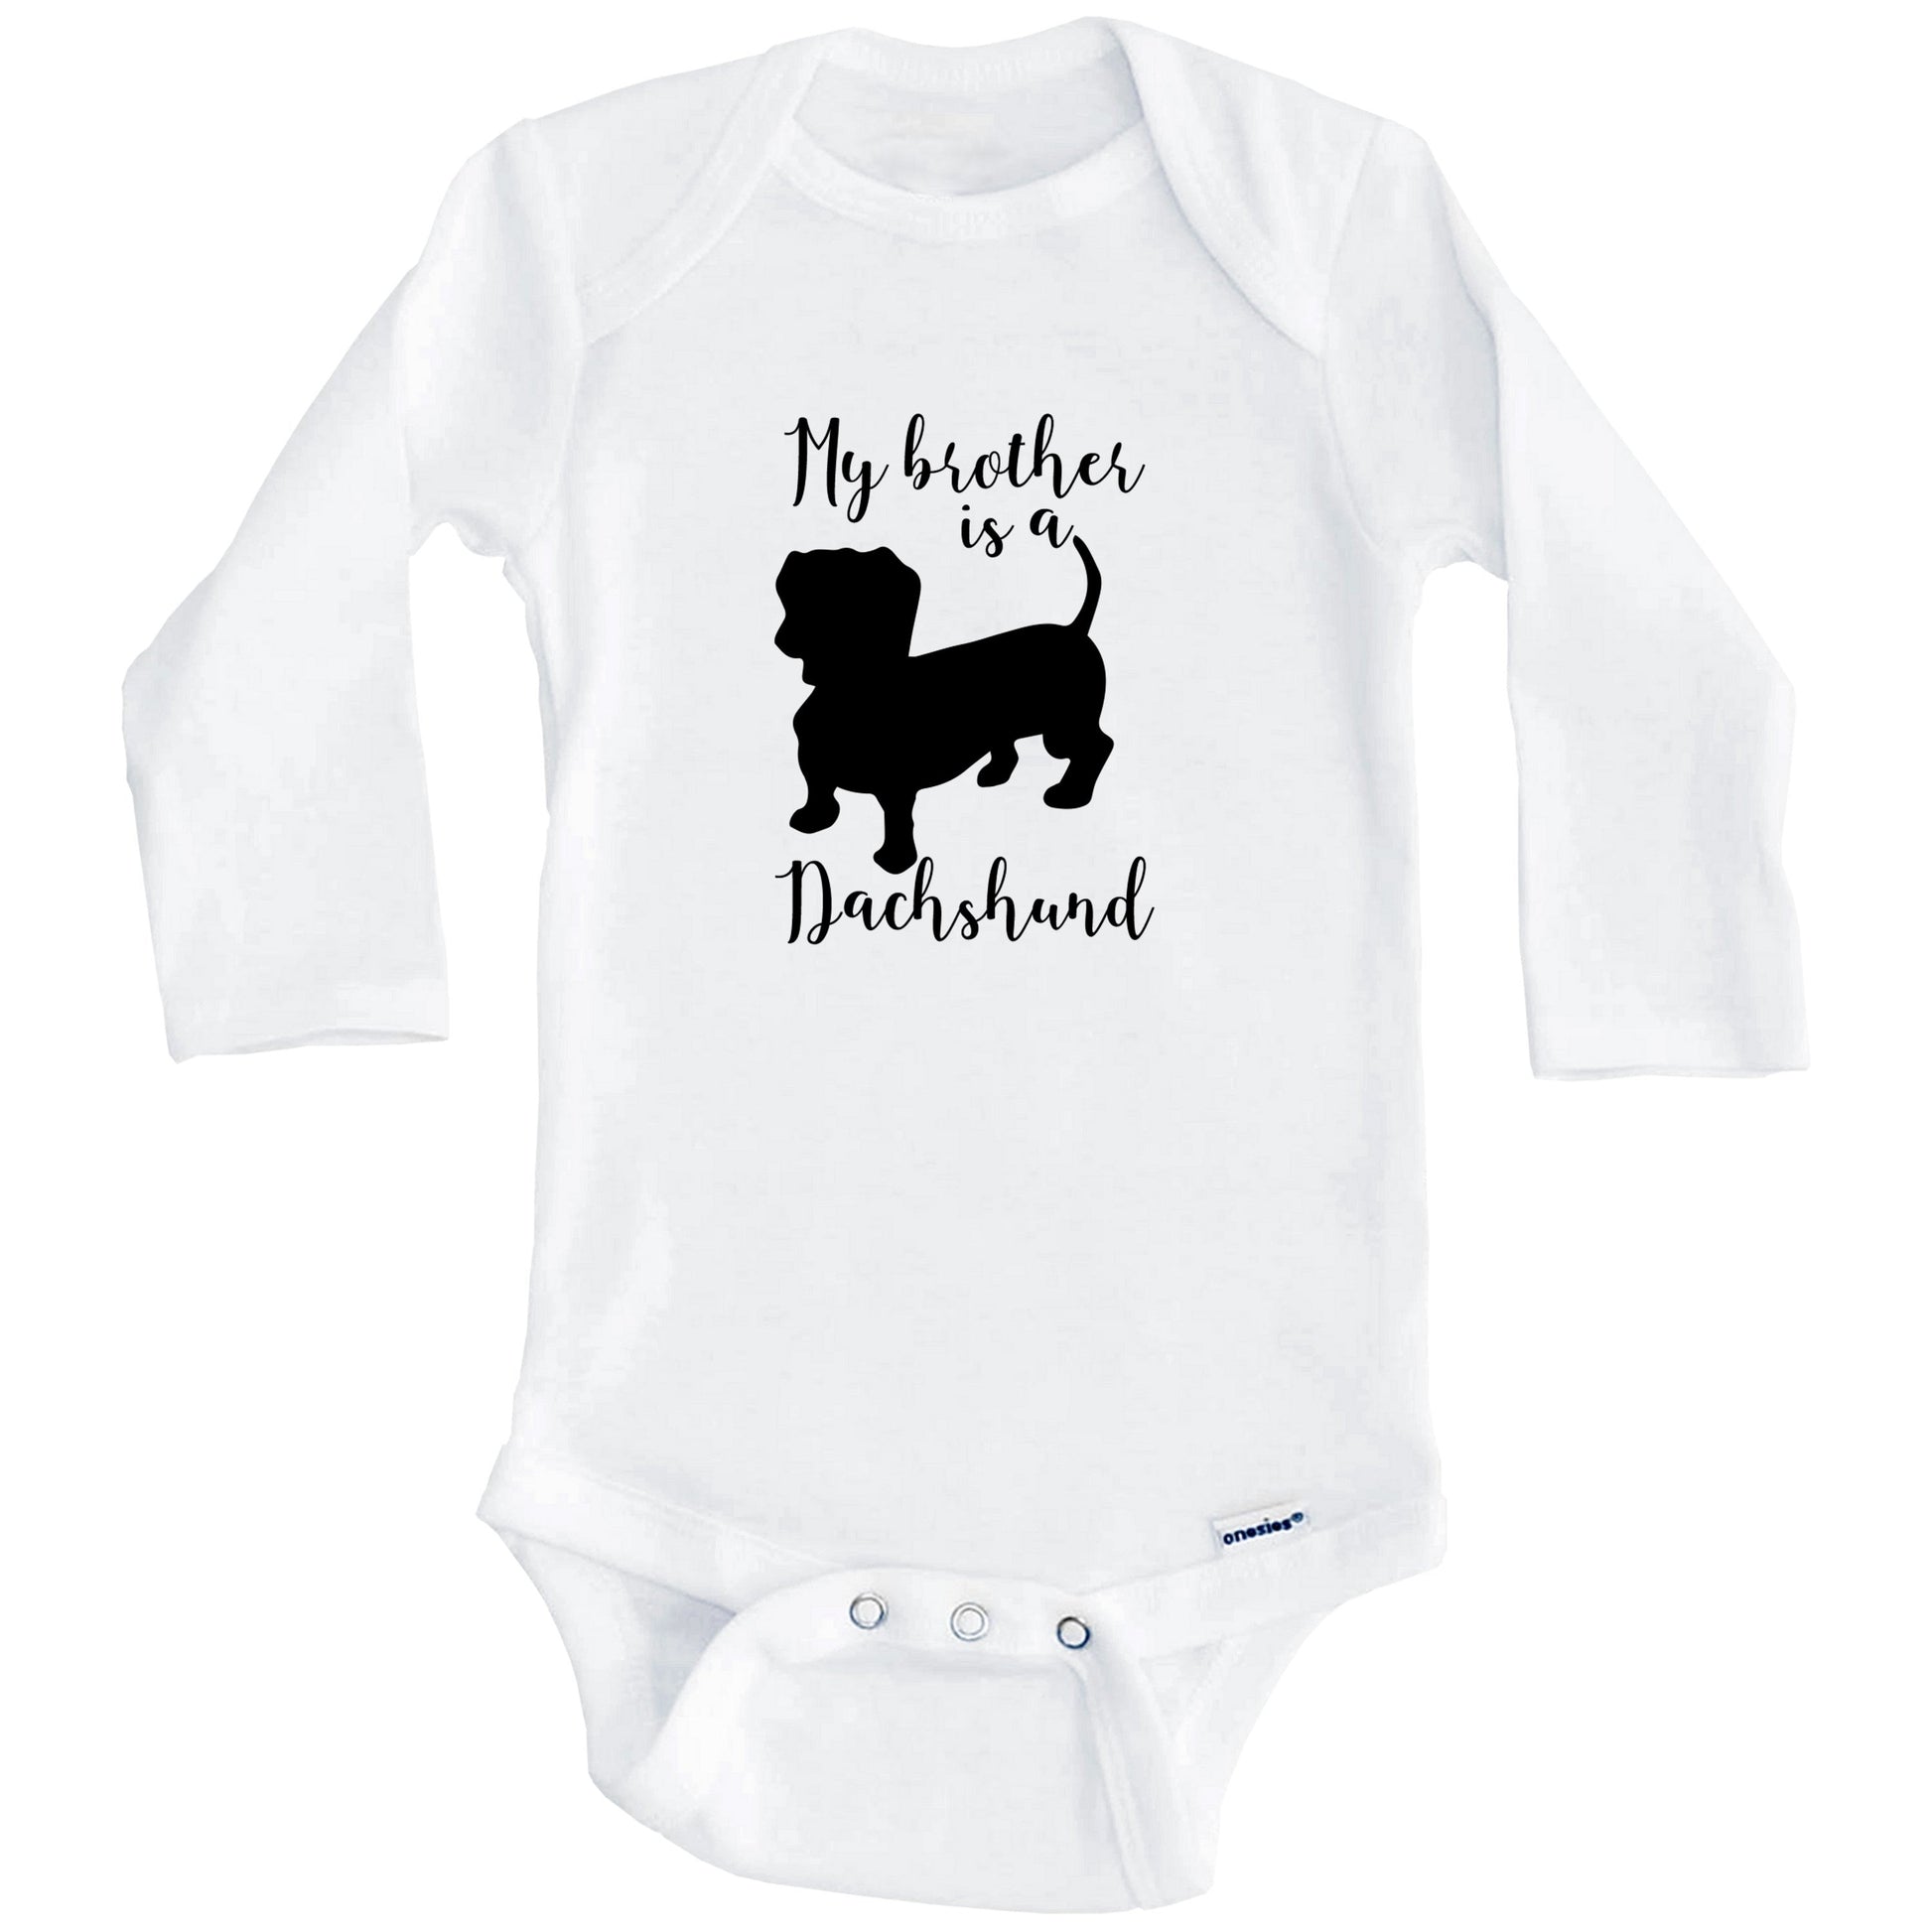 My Brother Is A Dachshund Cute Dog Baby Onesie - Doxen One Piece Baby Bodysuit (Long Sleeves)